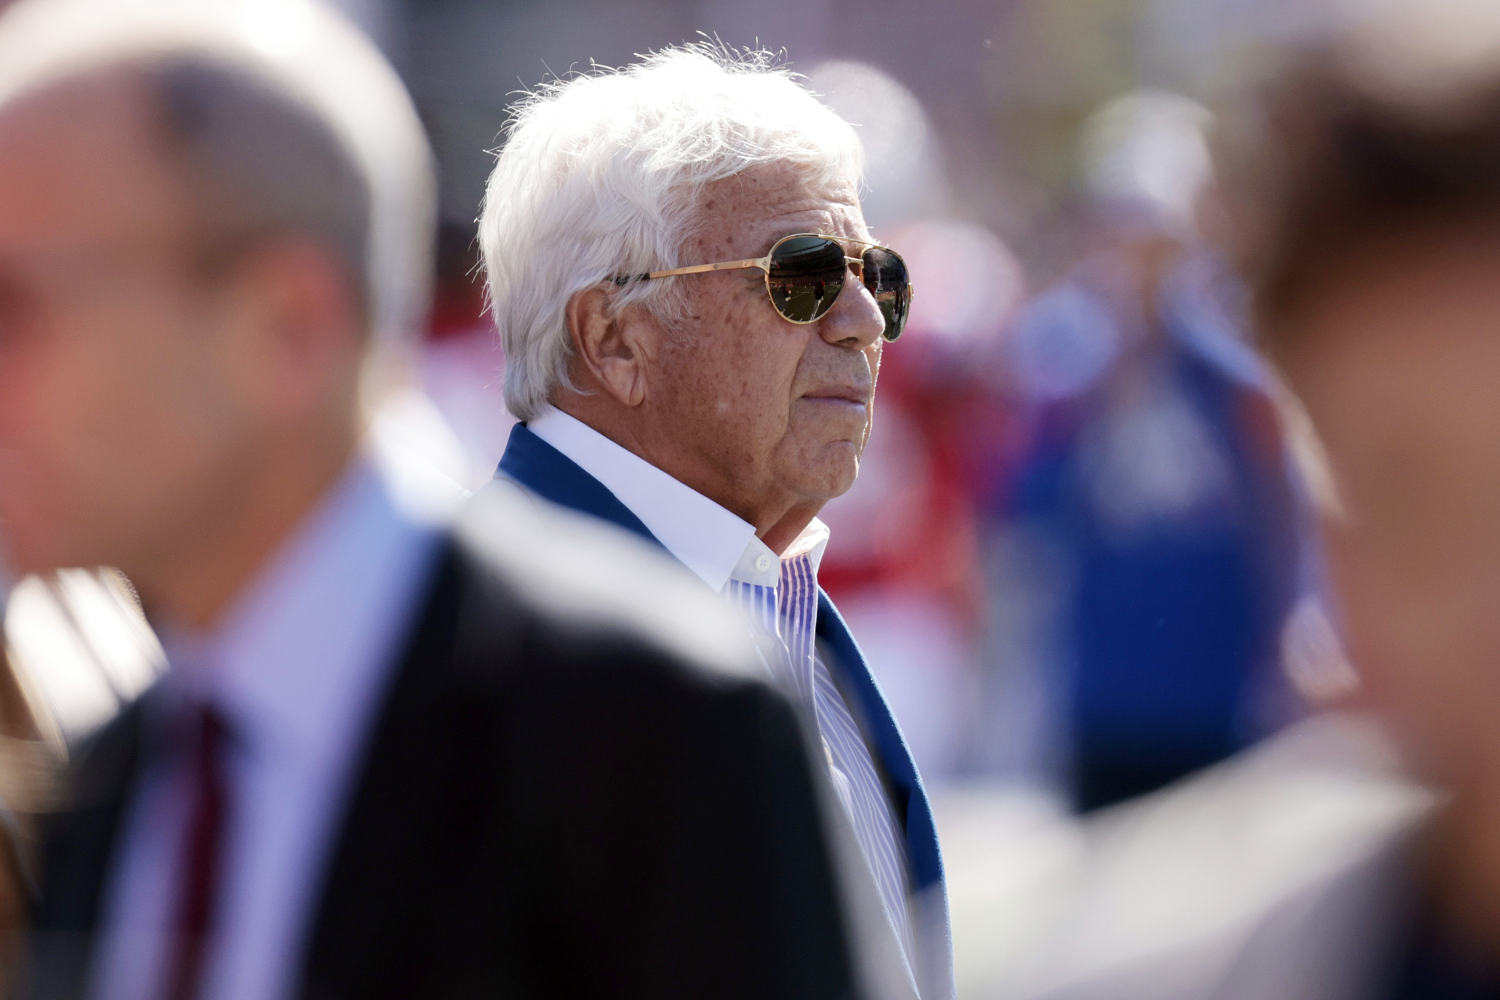 Patriots owner says 'Jew hatred' on U.S. college campuses parallels Germany in 1930s and '40s